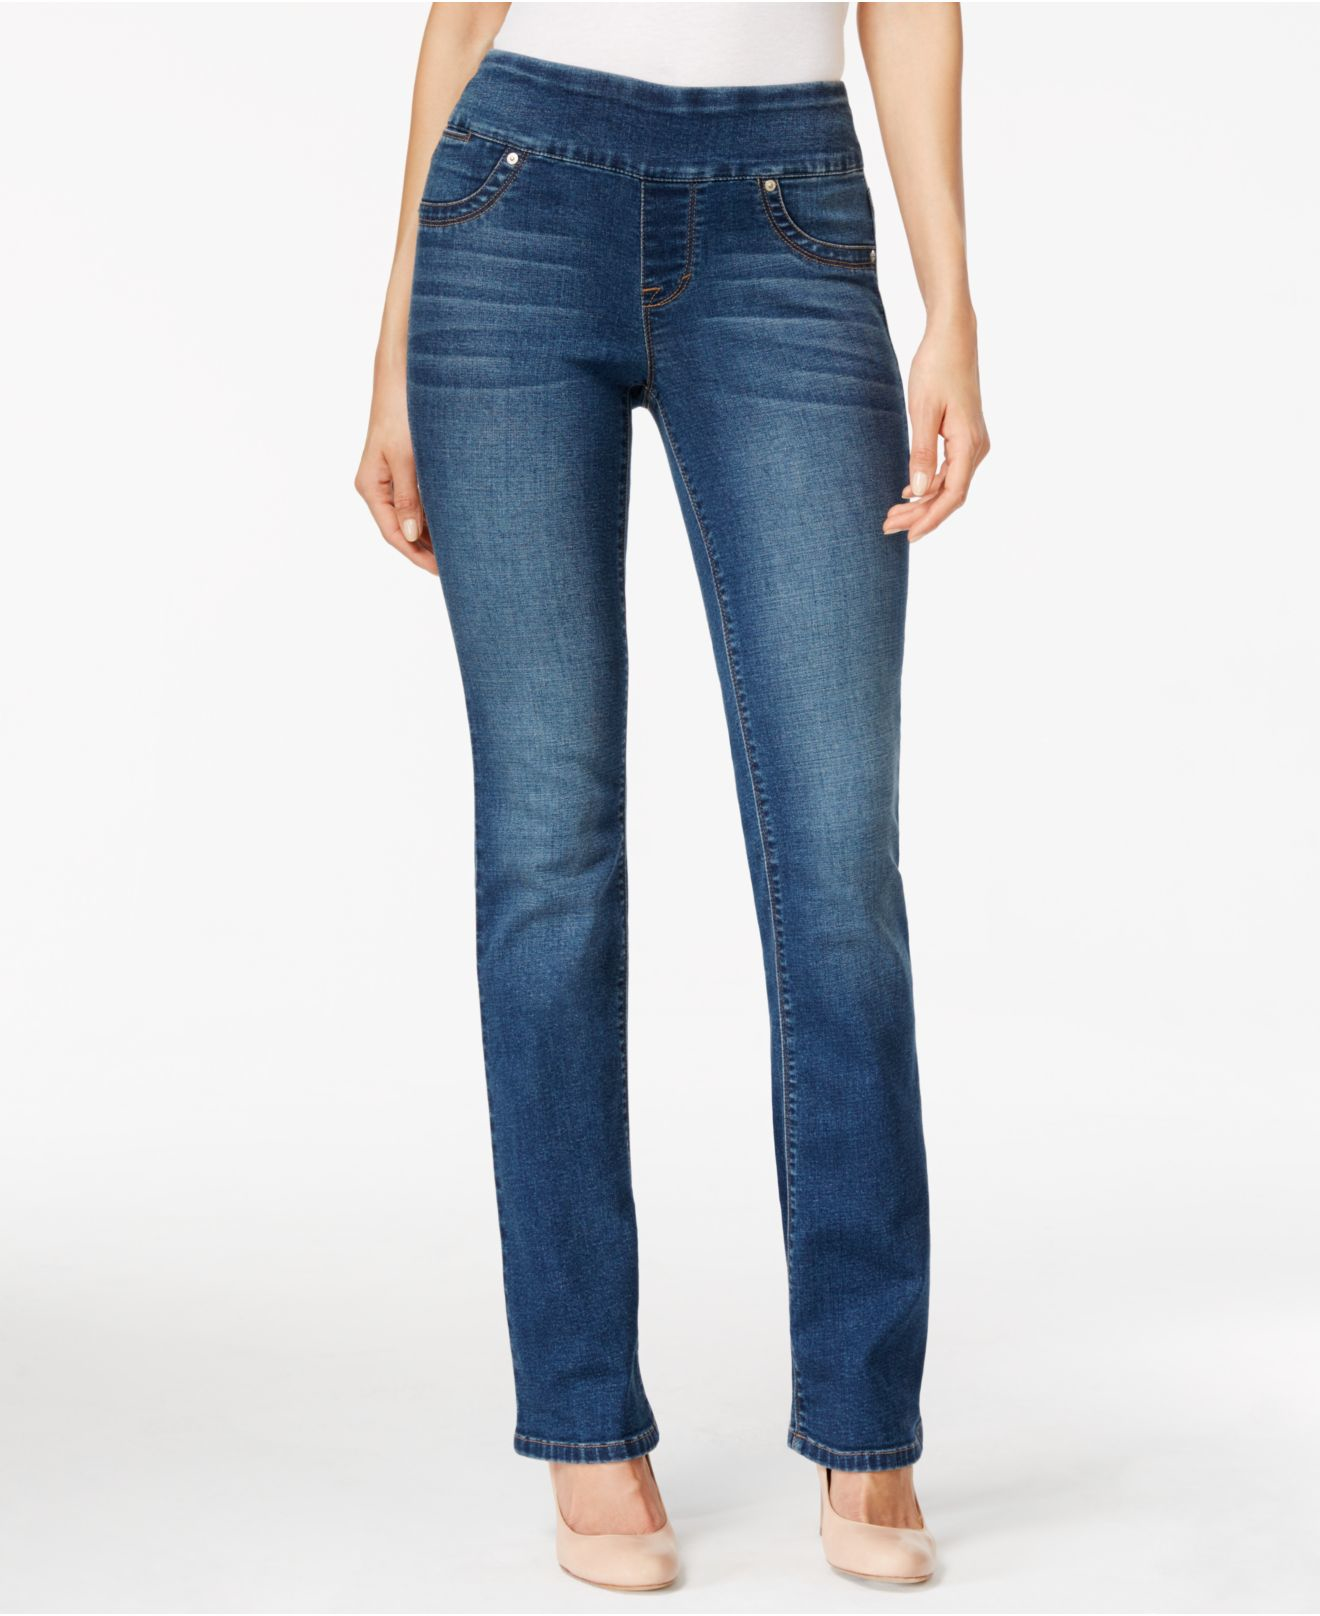 Lyst - Style & Co. Petite Pull-on Medium Wash Flared Jeans in Blue